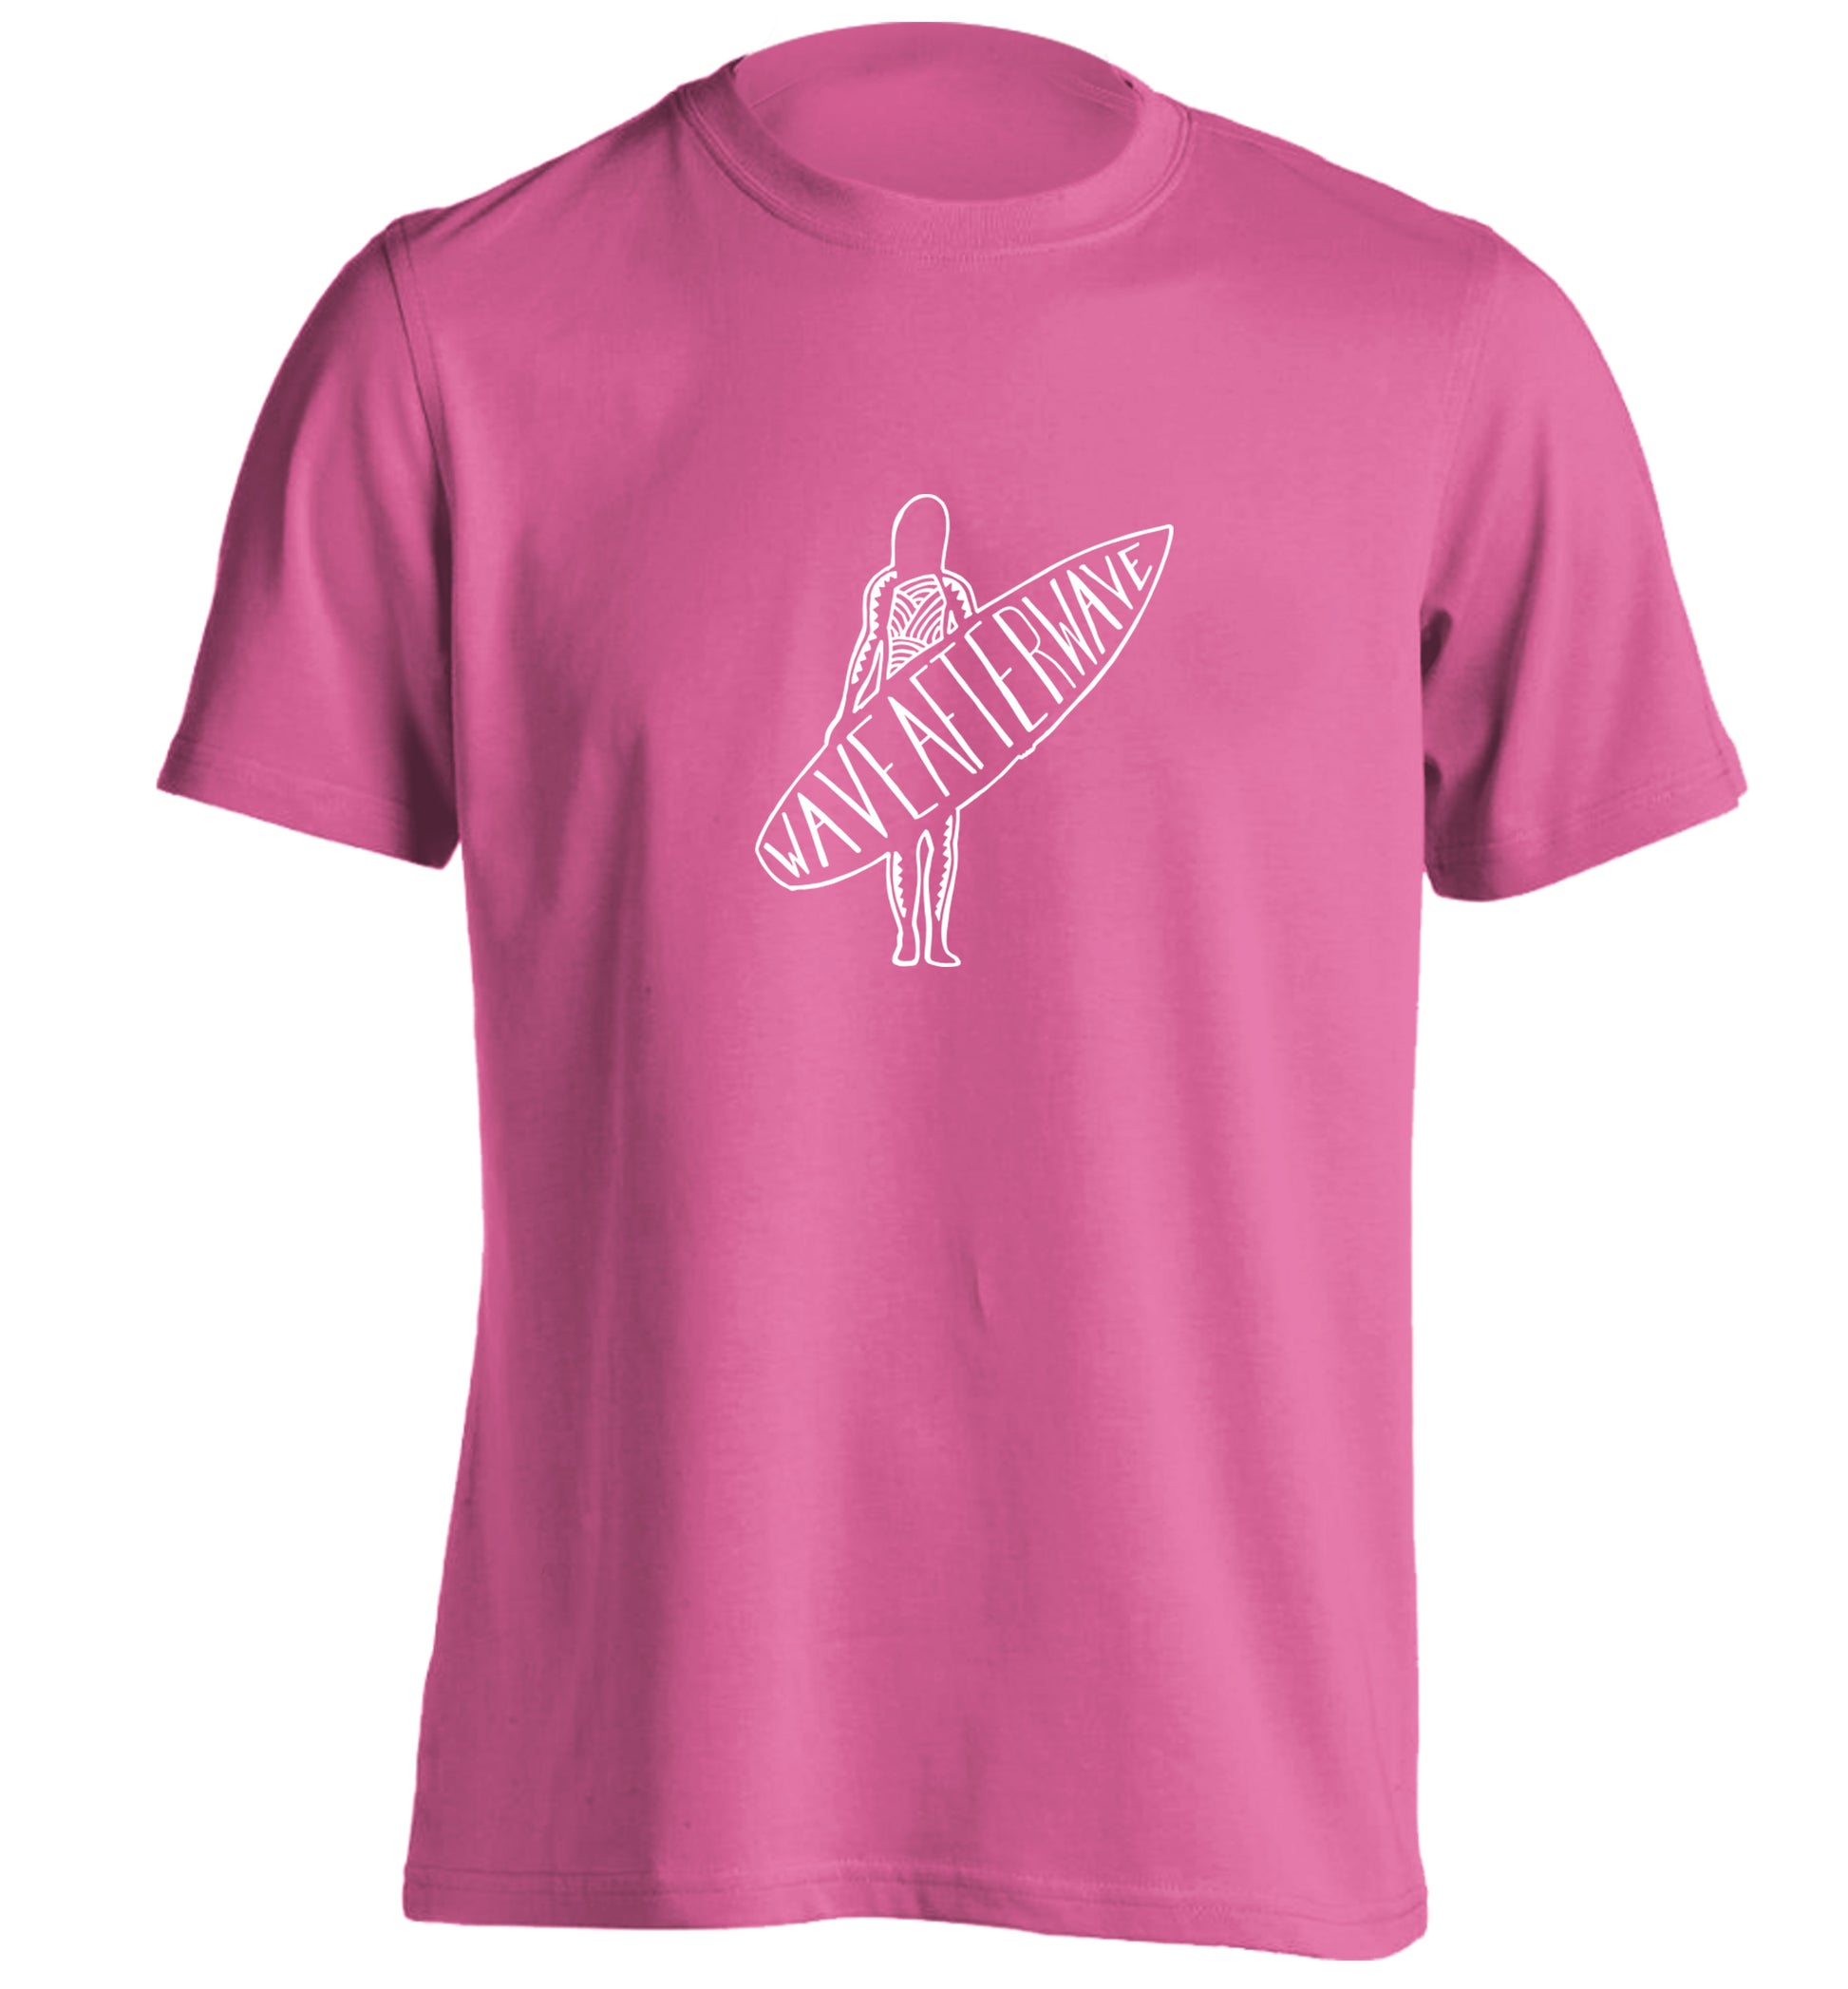 Wave after wave adults unisex pink Tshirt 2XL